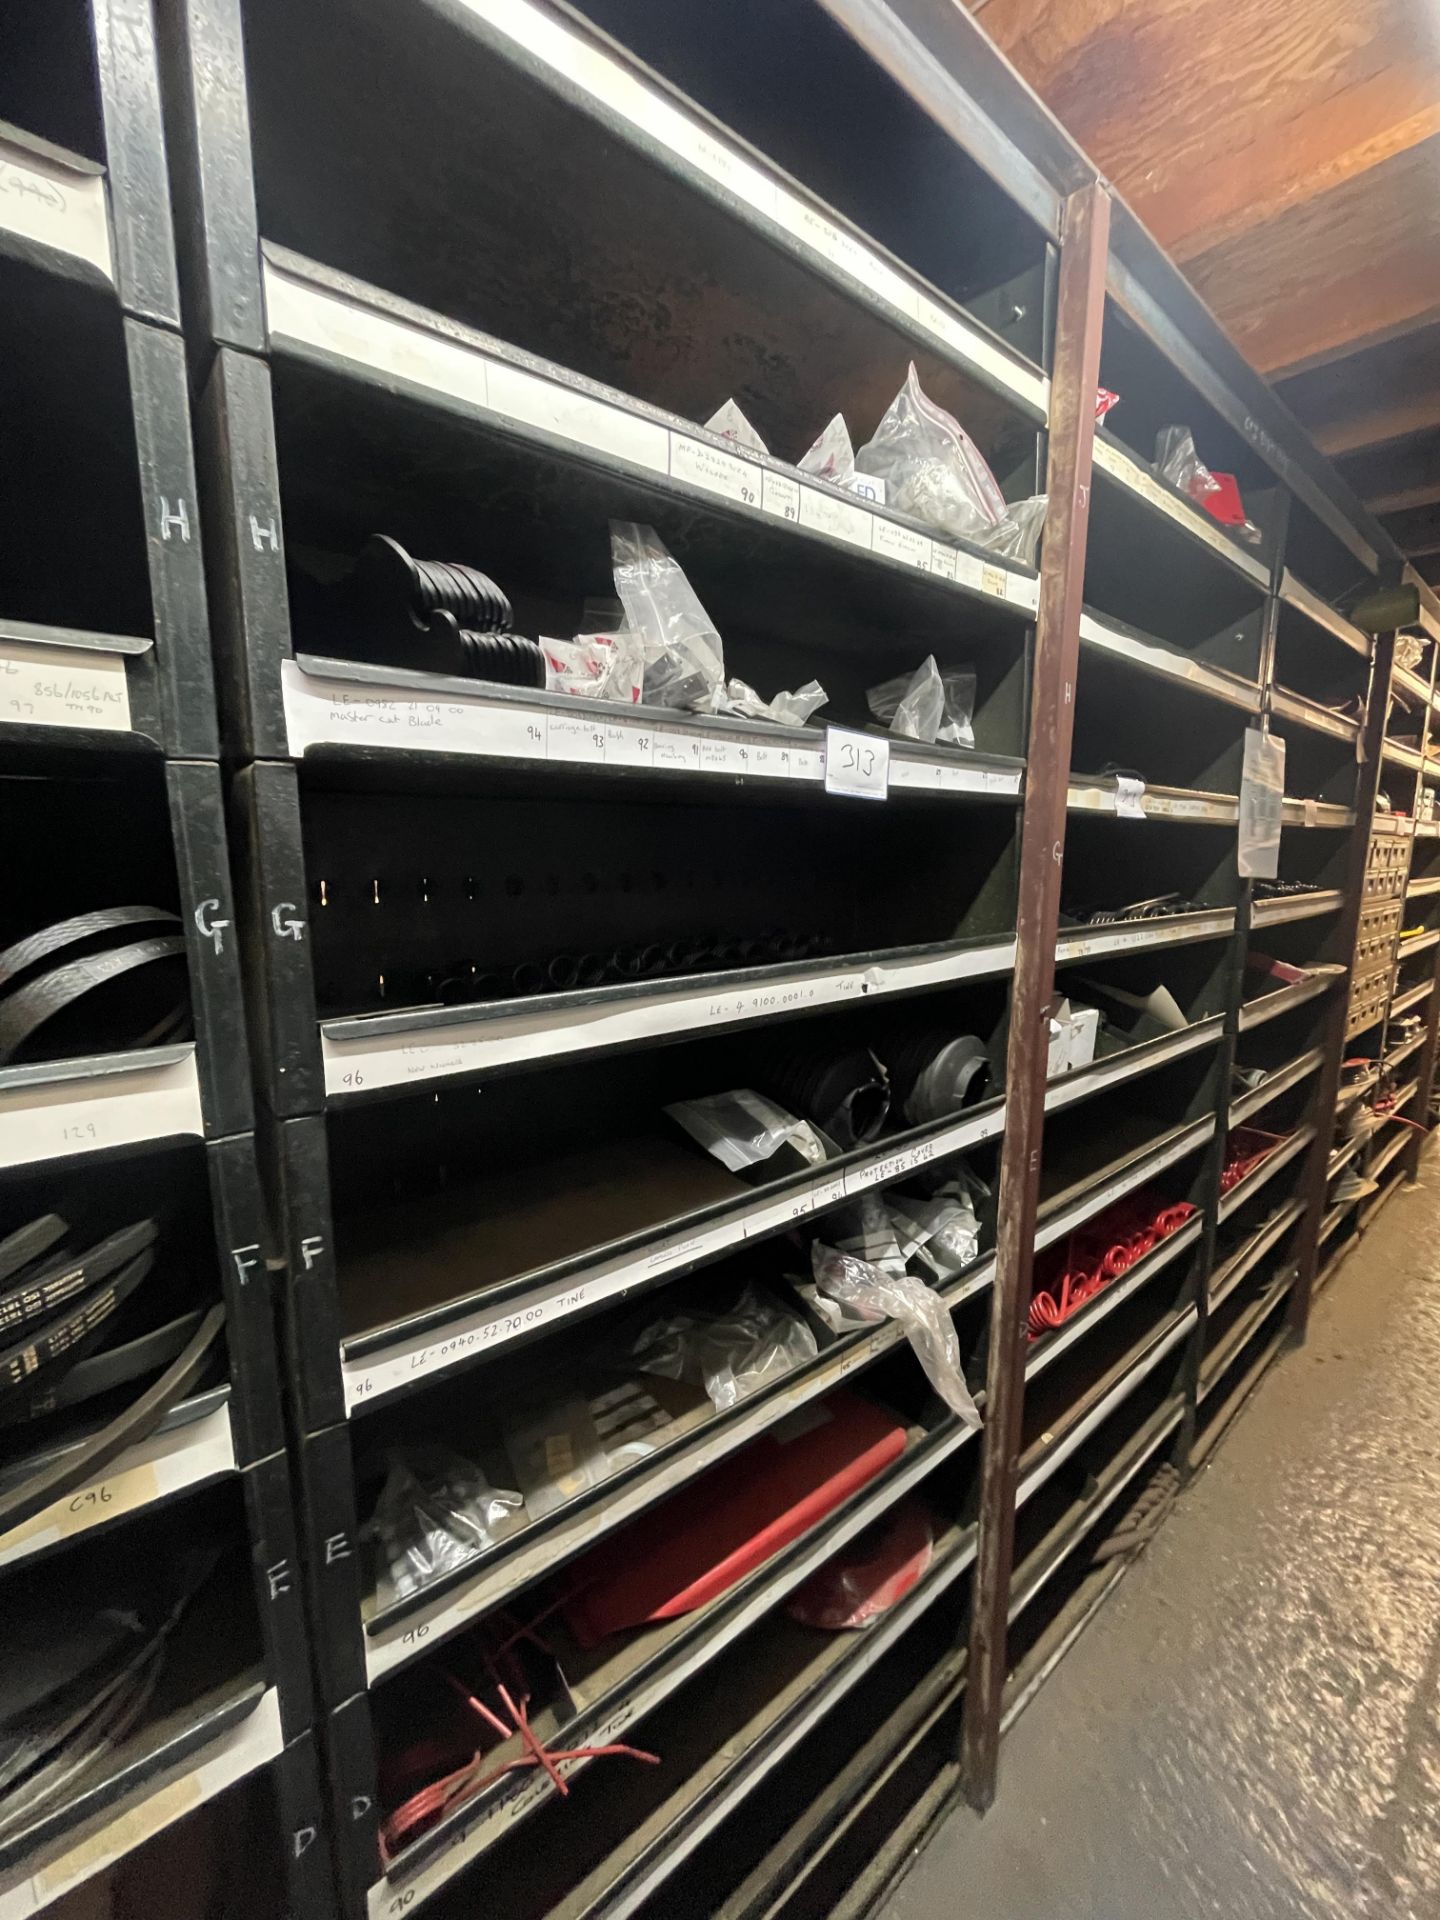 Contents of 3 Racks to Include Various LELY Tines, Skid Plates & Mower Blades As Lotted